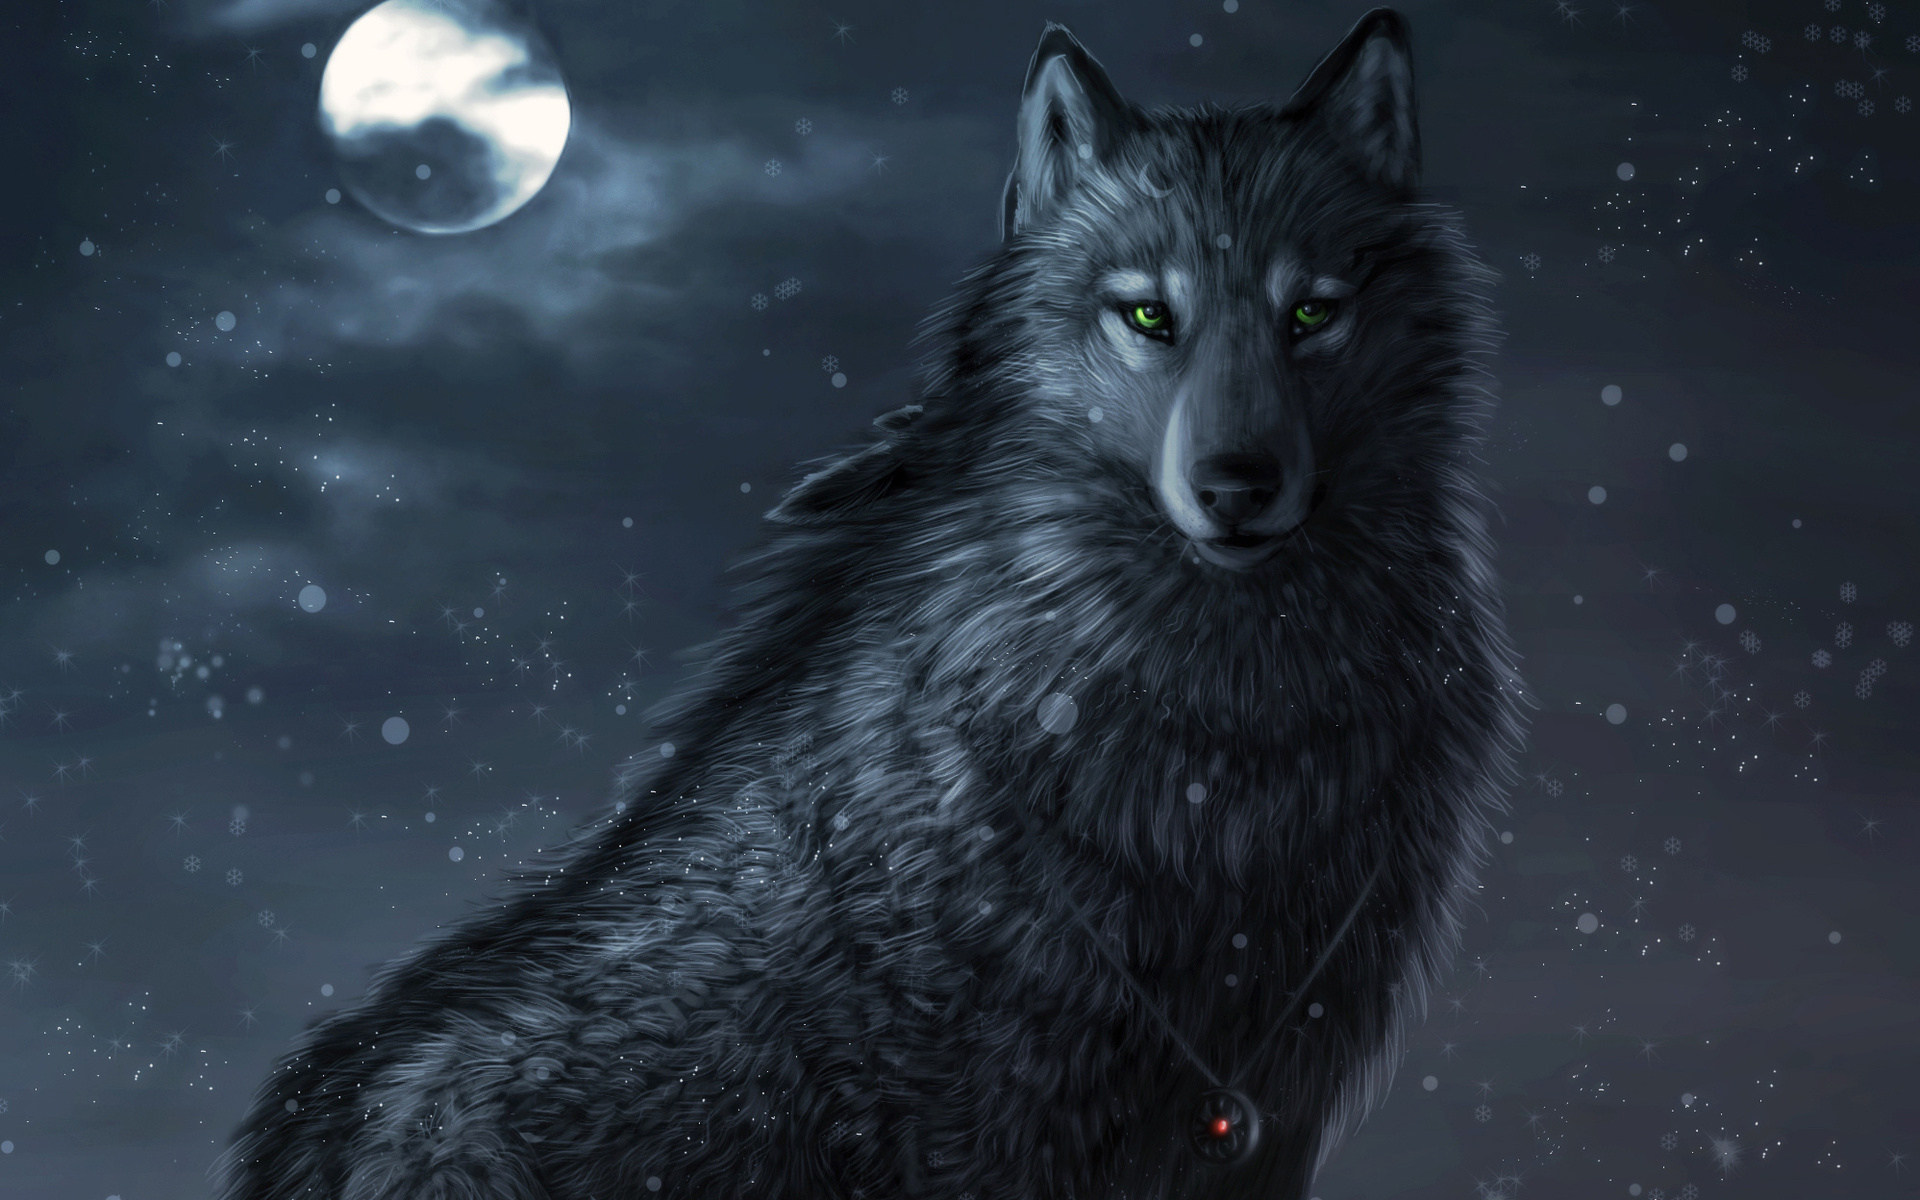 Night Wolf wallpapers, Movie, HQ Night Wolf pictures | 4K Wallpapers 2019